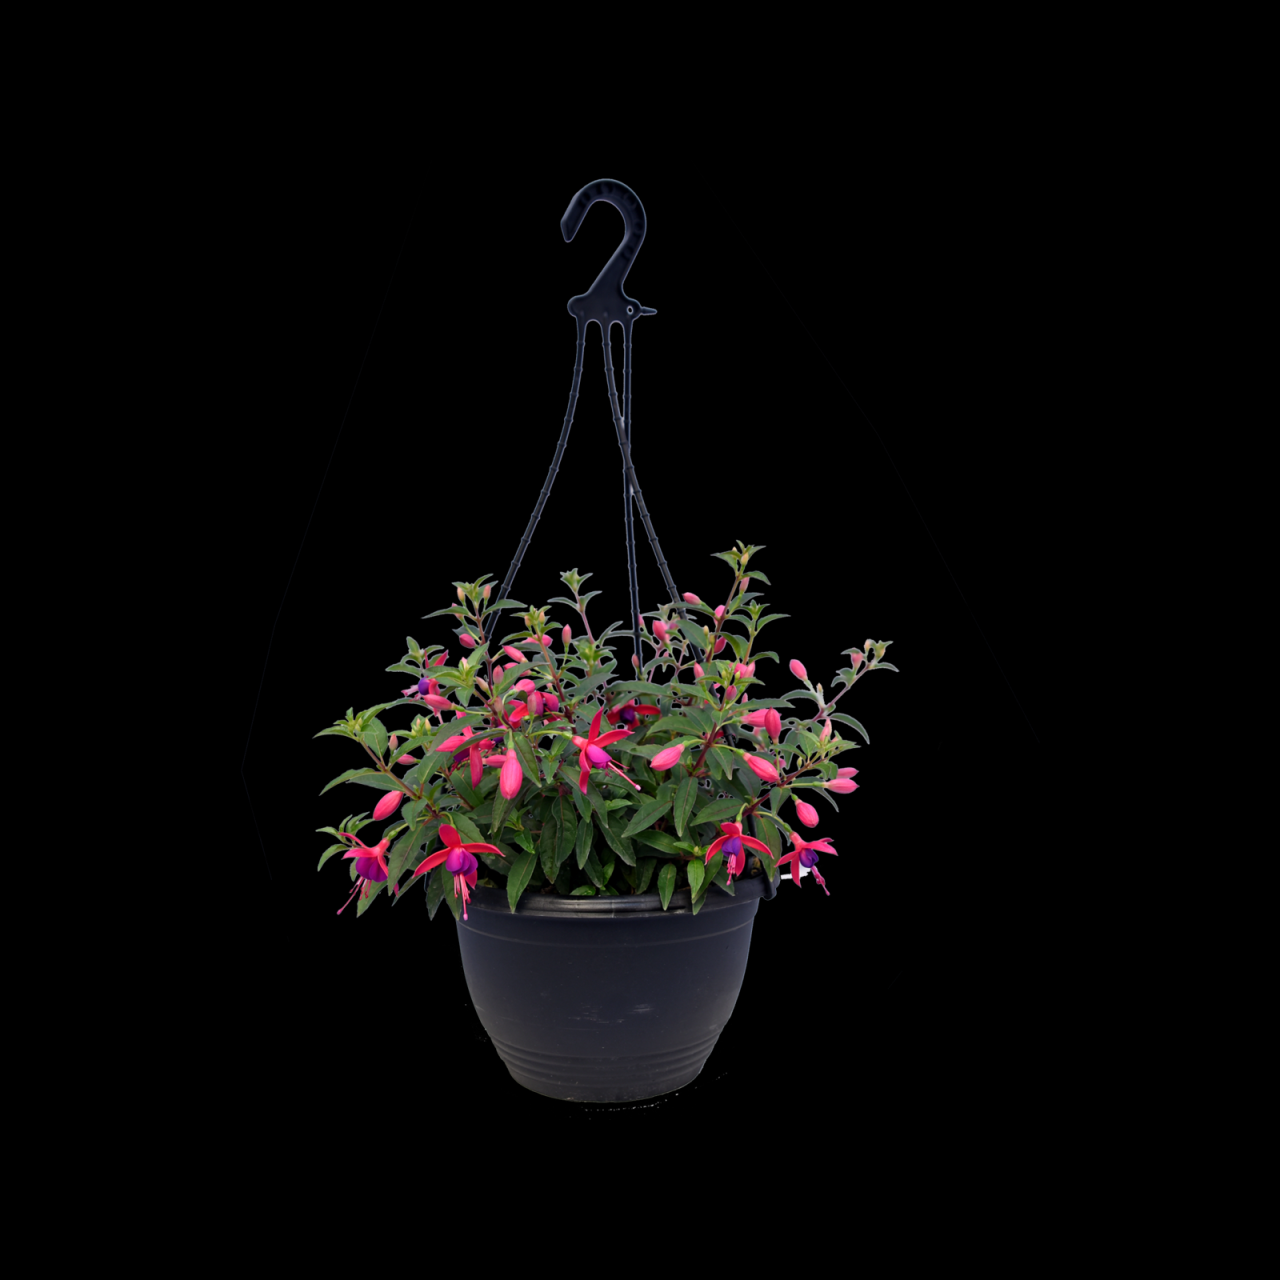 Hanging Plants Indoor | Hanging Fuchsia Bunnings: A Guide to Creating Stunning Vertical Gardens